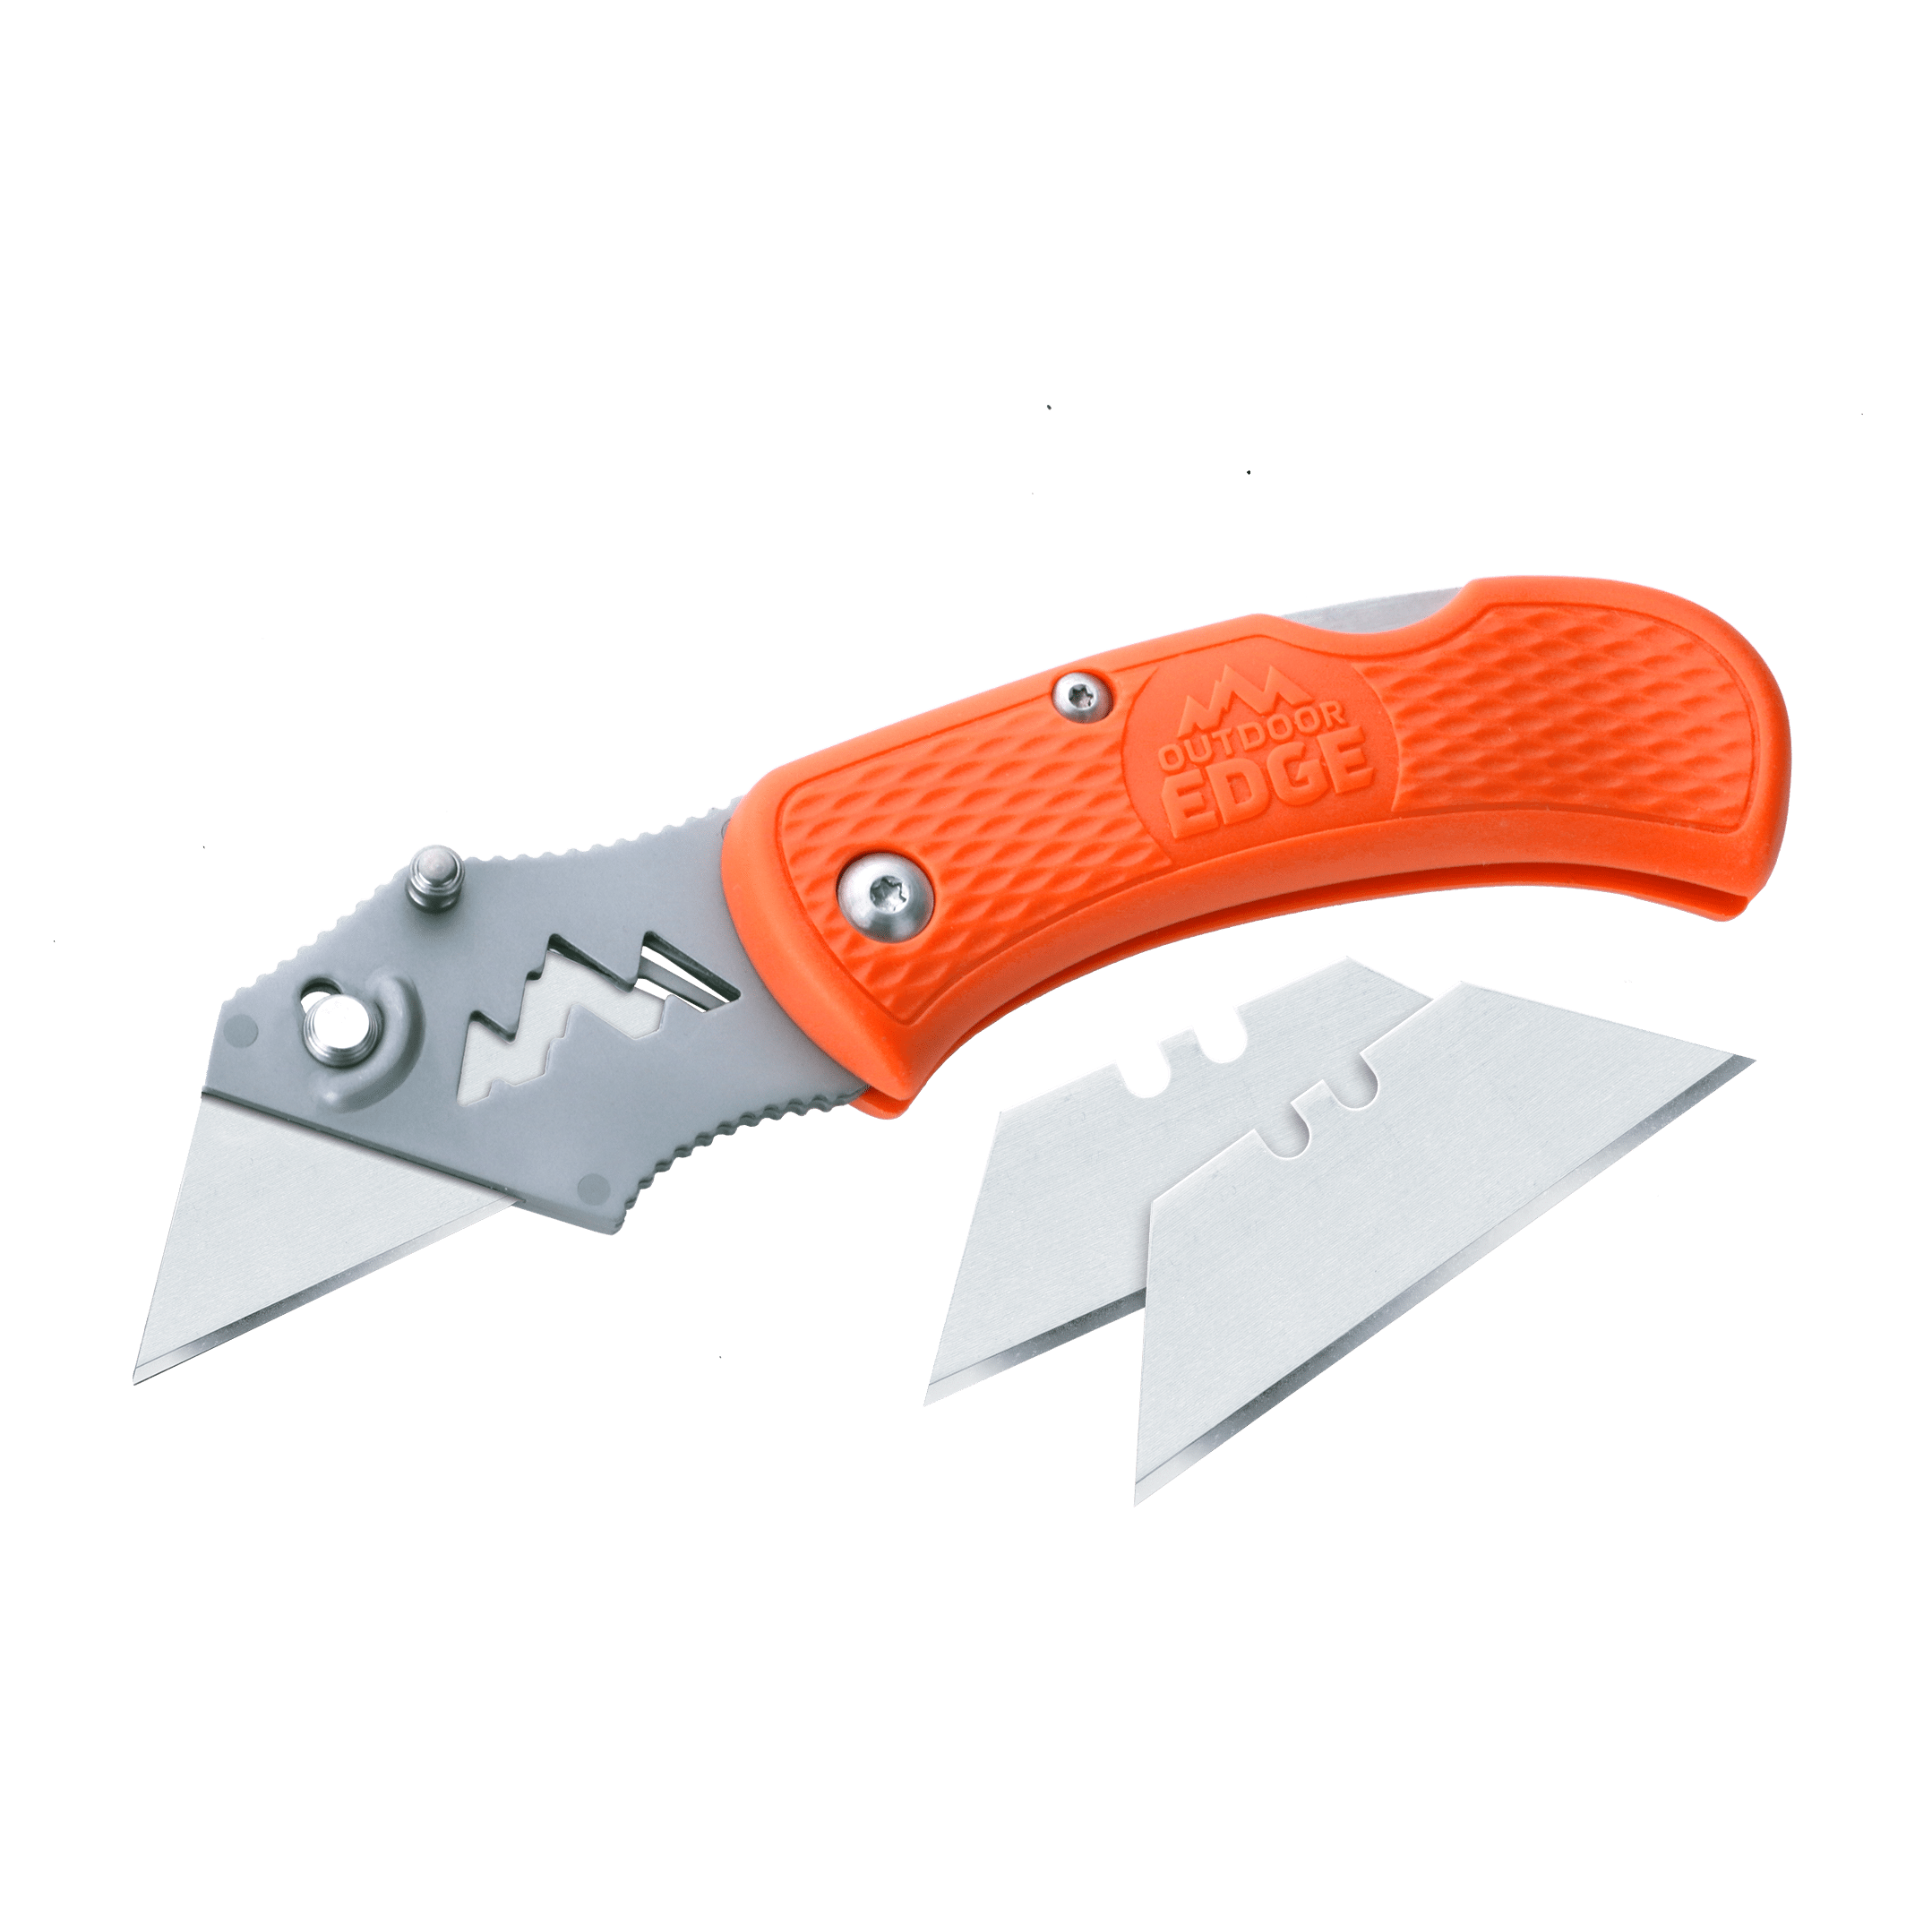 B.O.A (Box Opening Assistant), Utility Knife